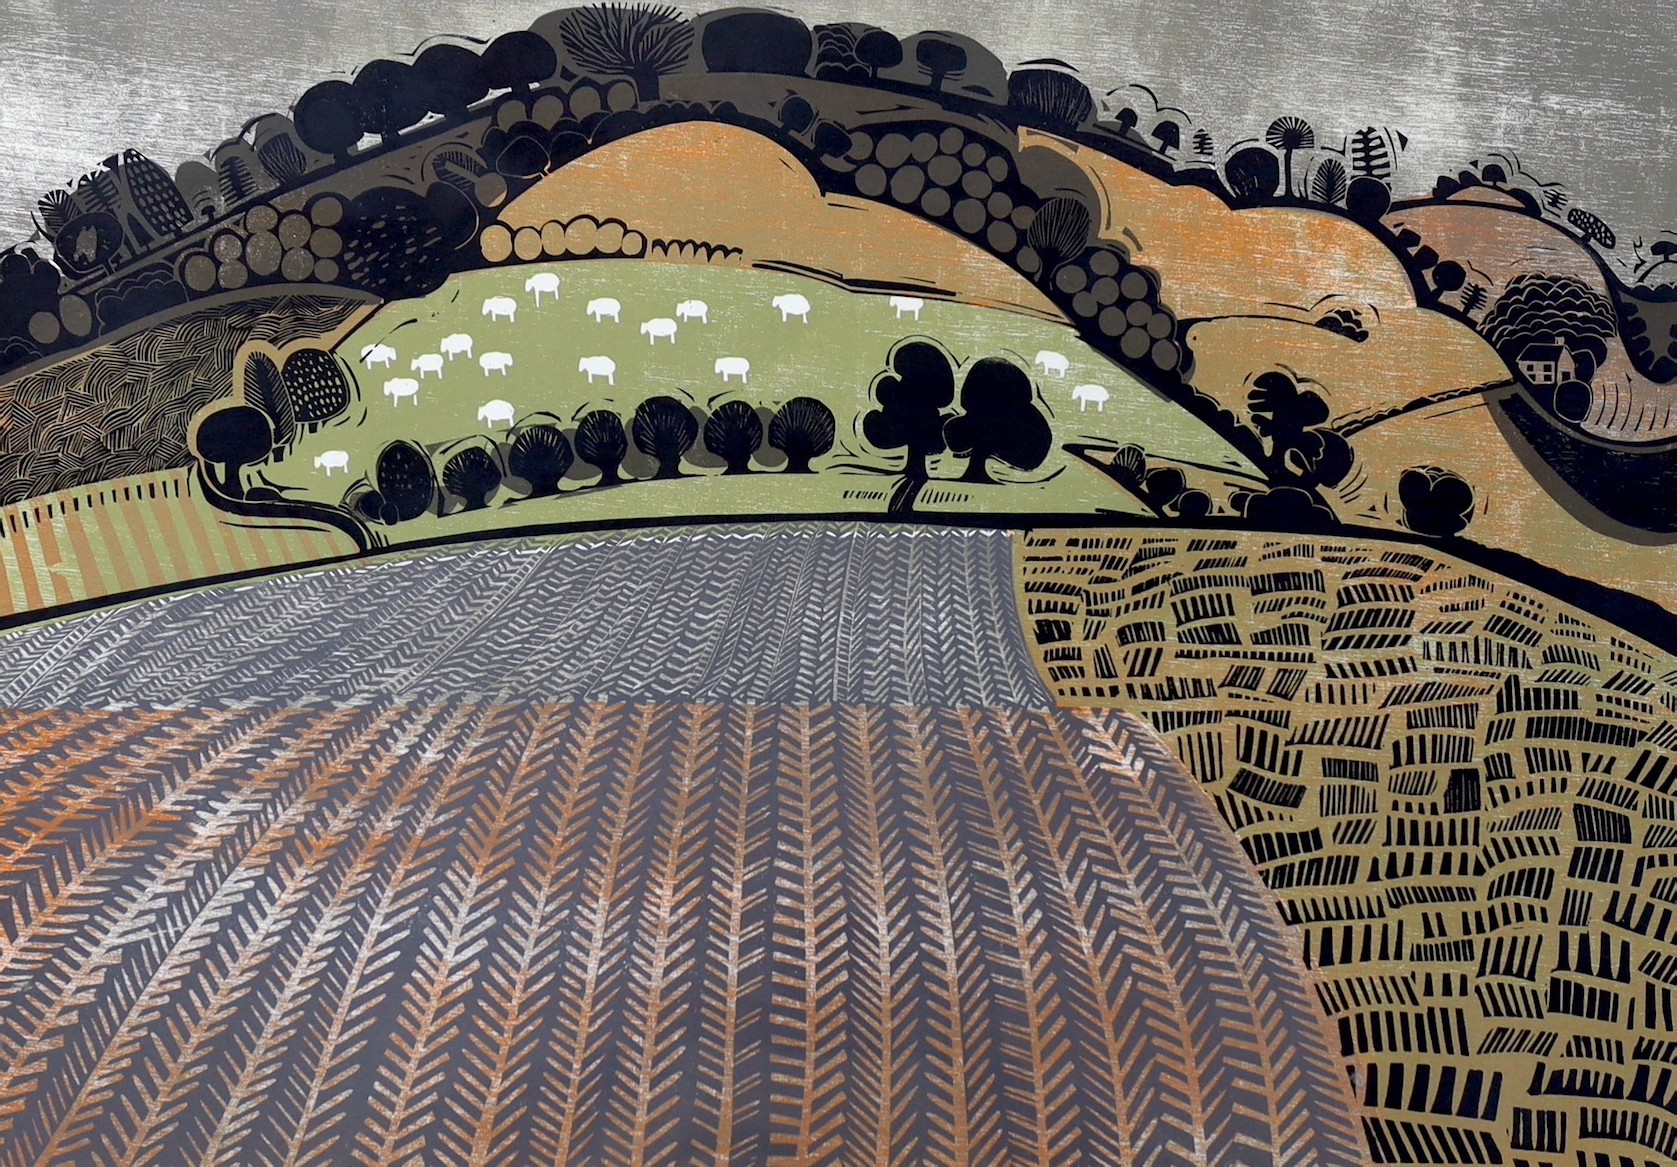 Graham Clarke (b.1941), woodcut, 'Hill at Woodlands', signed in pencil and inscribed 'proof', overall 58 x 78cm